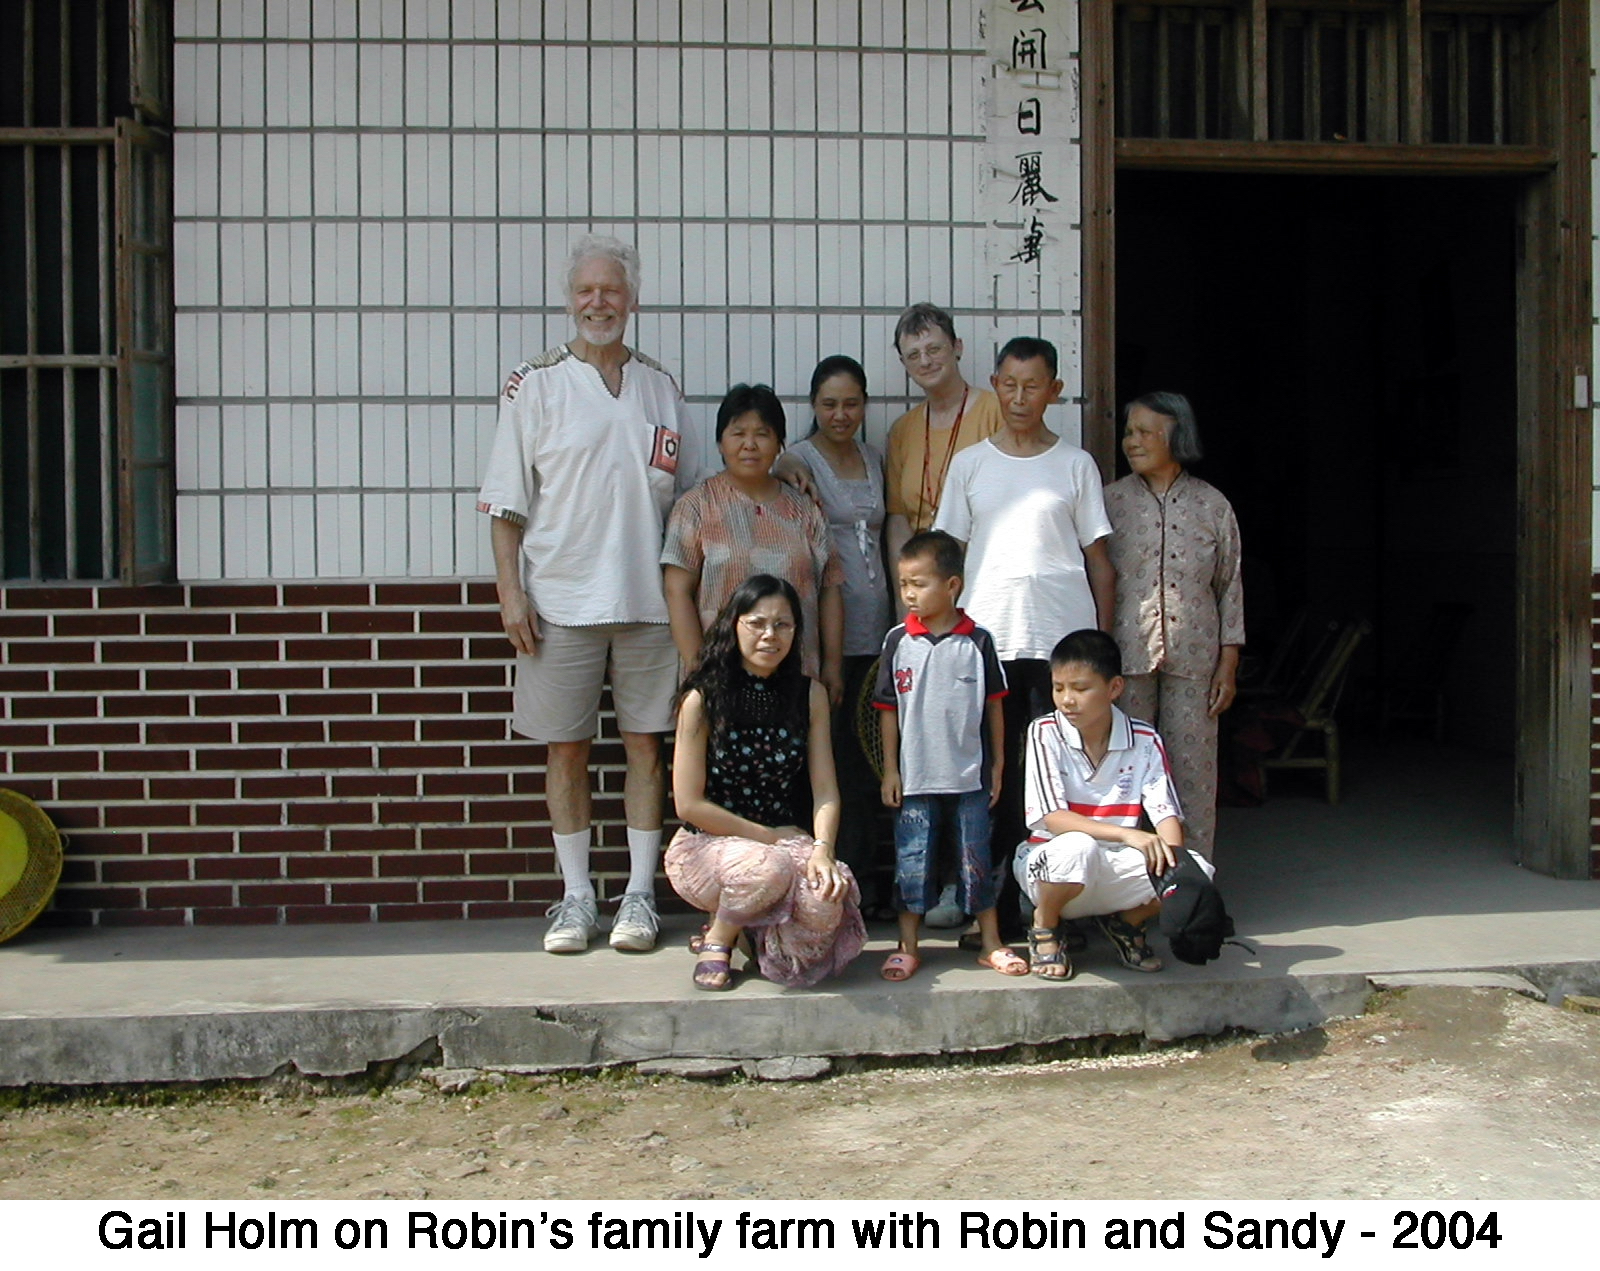 Gail with others in front of the Chinese farmhouse 